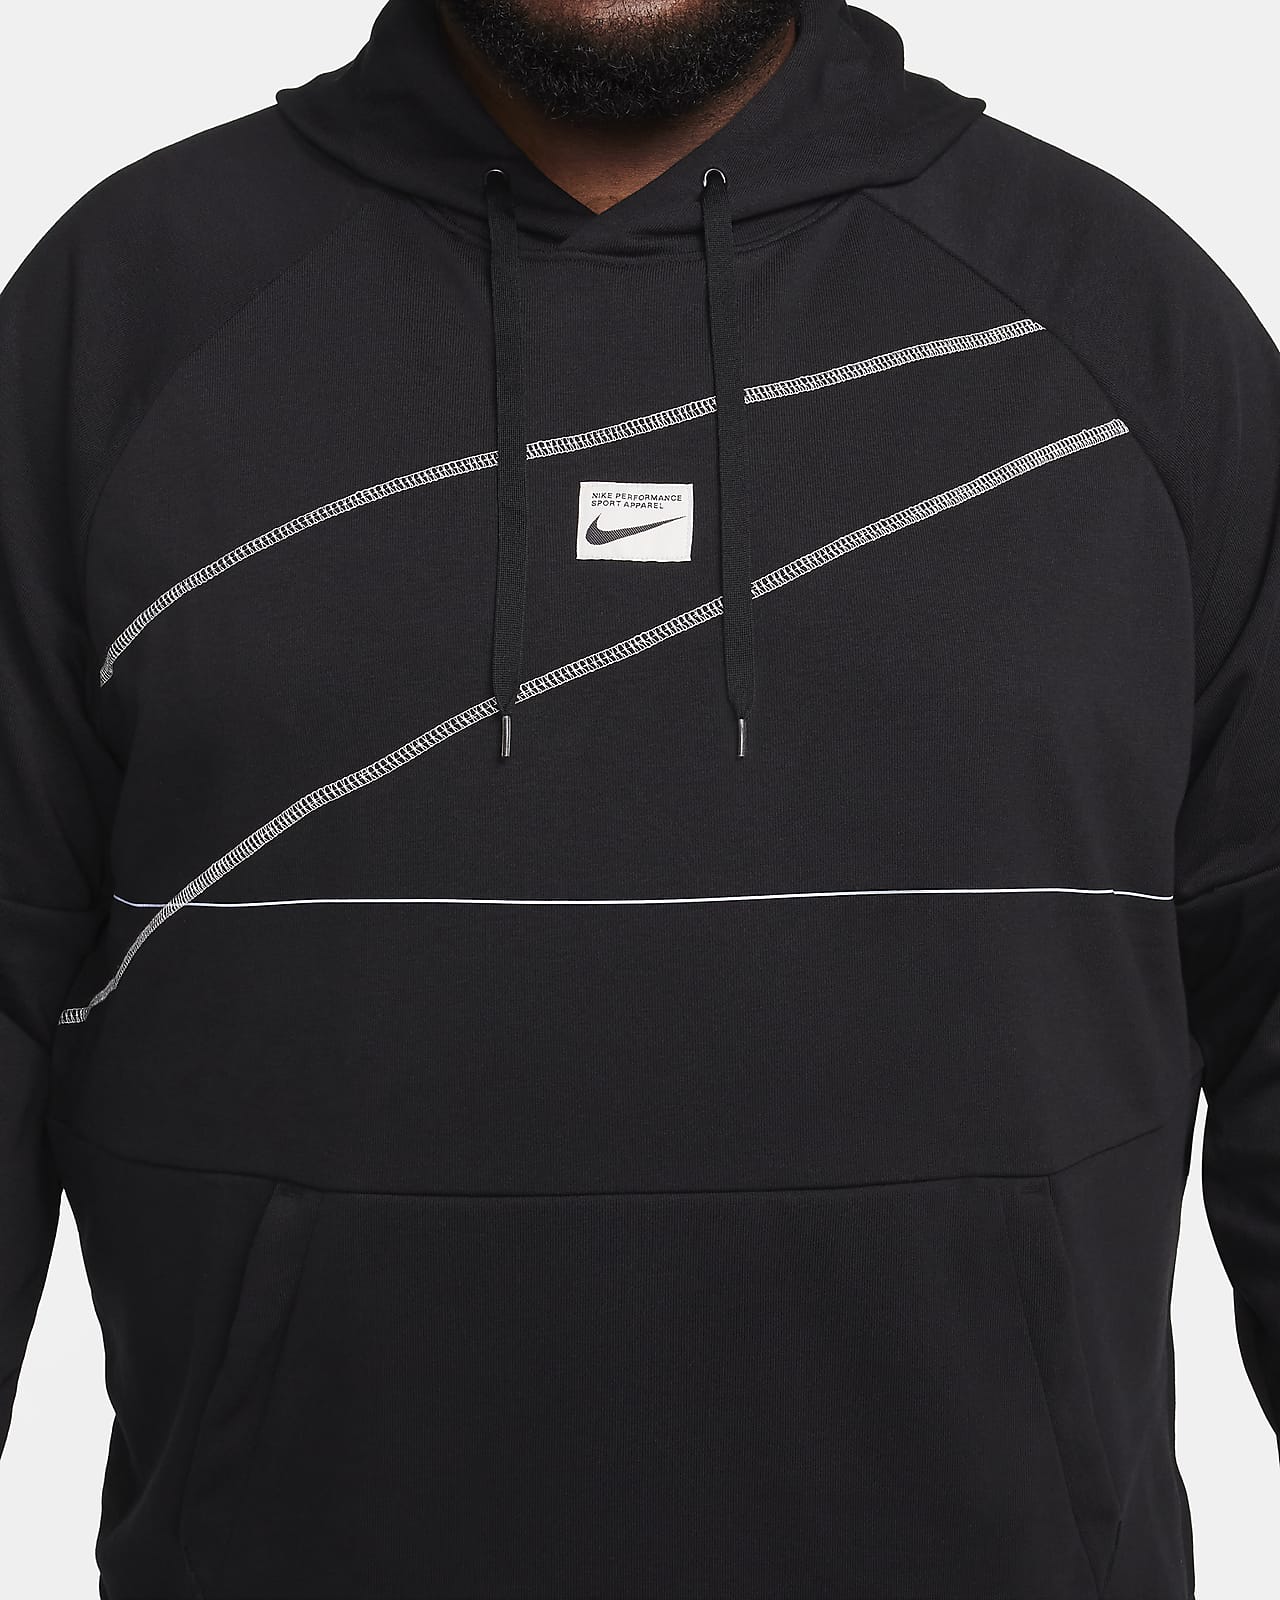 https://static.nike.com/a/images/t_PDP_1280_v1/f_auto,q_auto:eco/8d7b8adb-9e57-4a27-8b9d-dc9c27449d50/dri-fit-mens-fleece-pullover-fitness-hoodie-srSNwQ.png